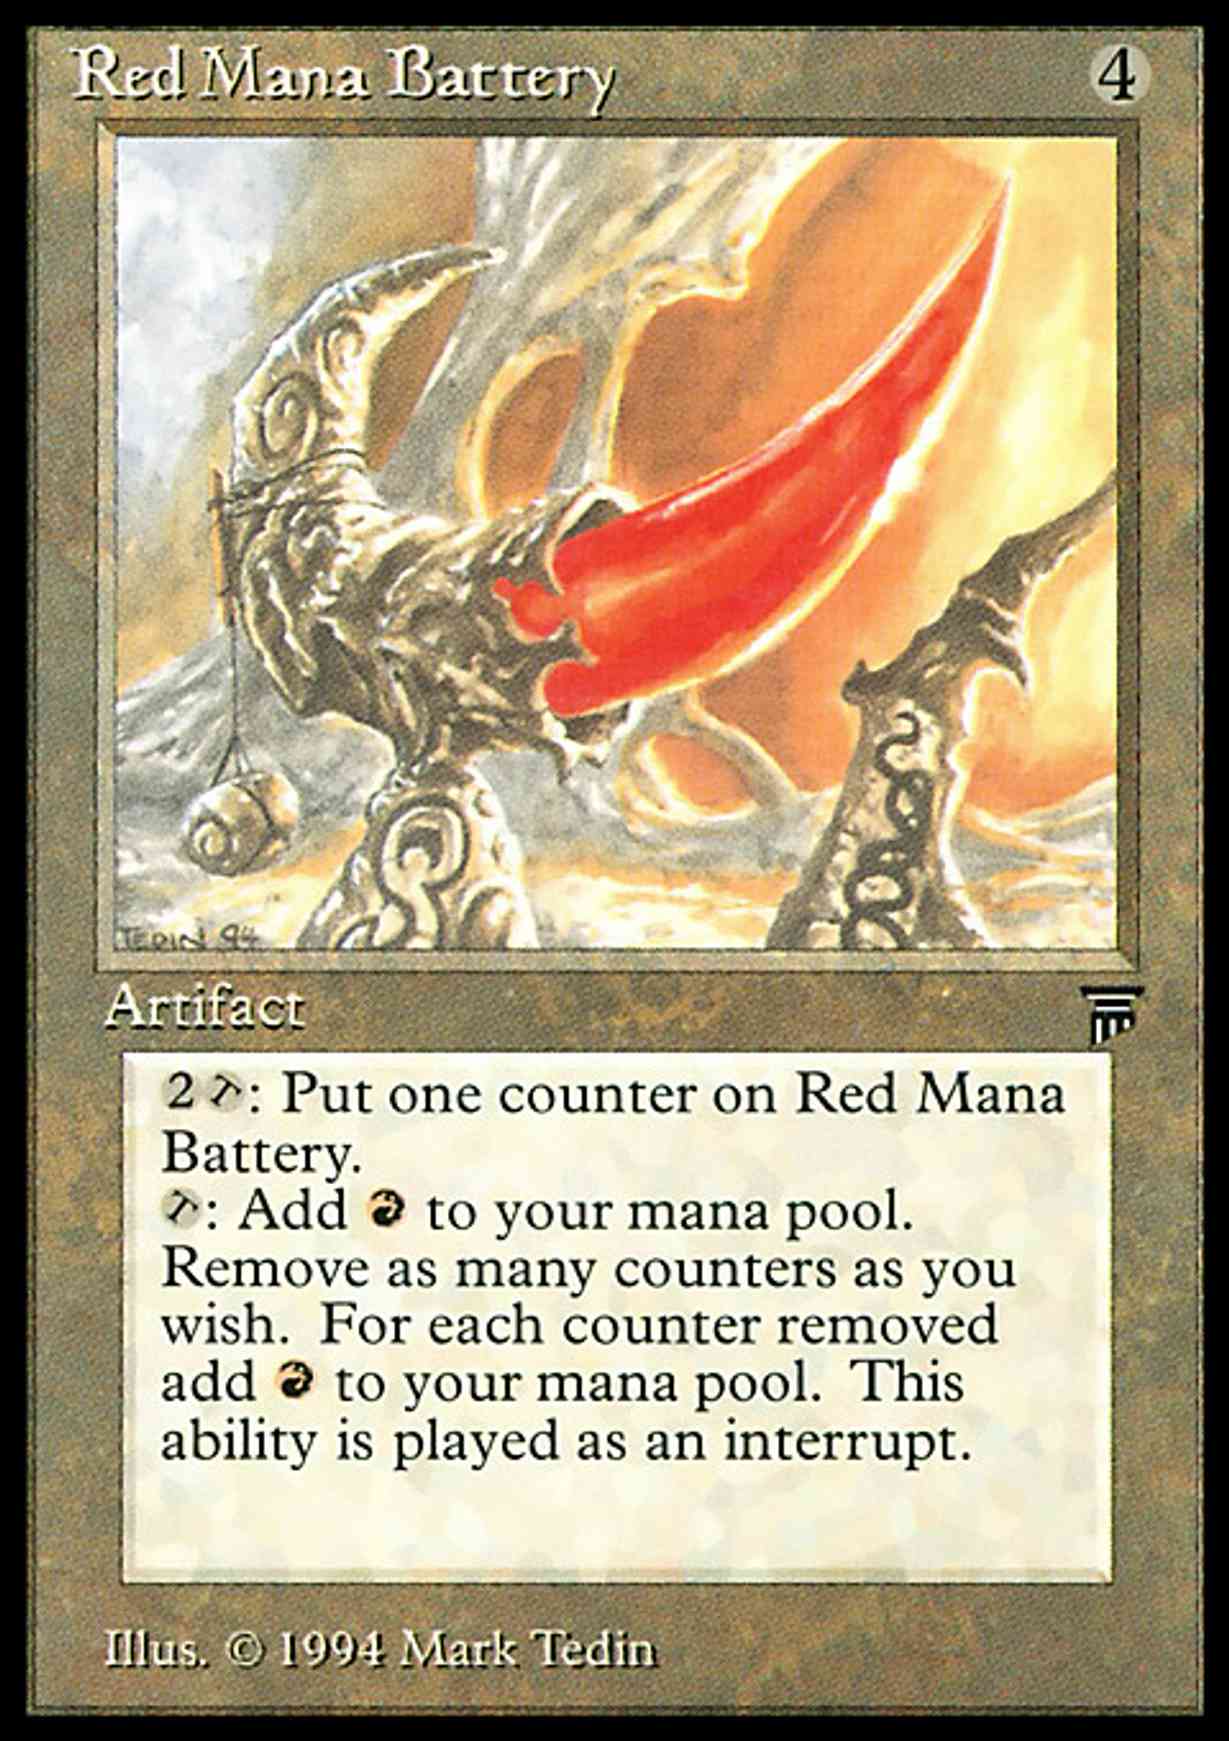 Red Mana Battery magic card front